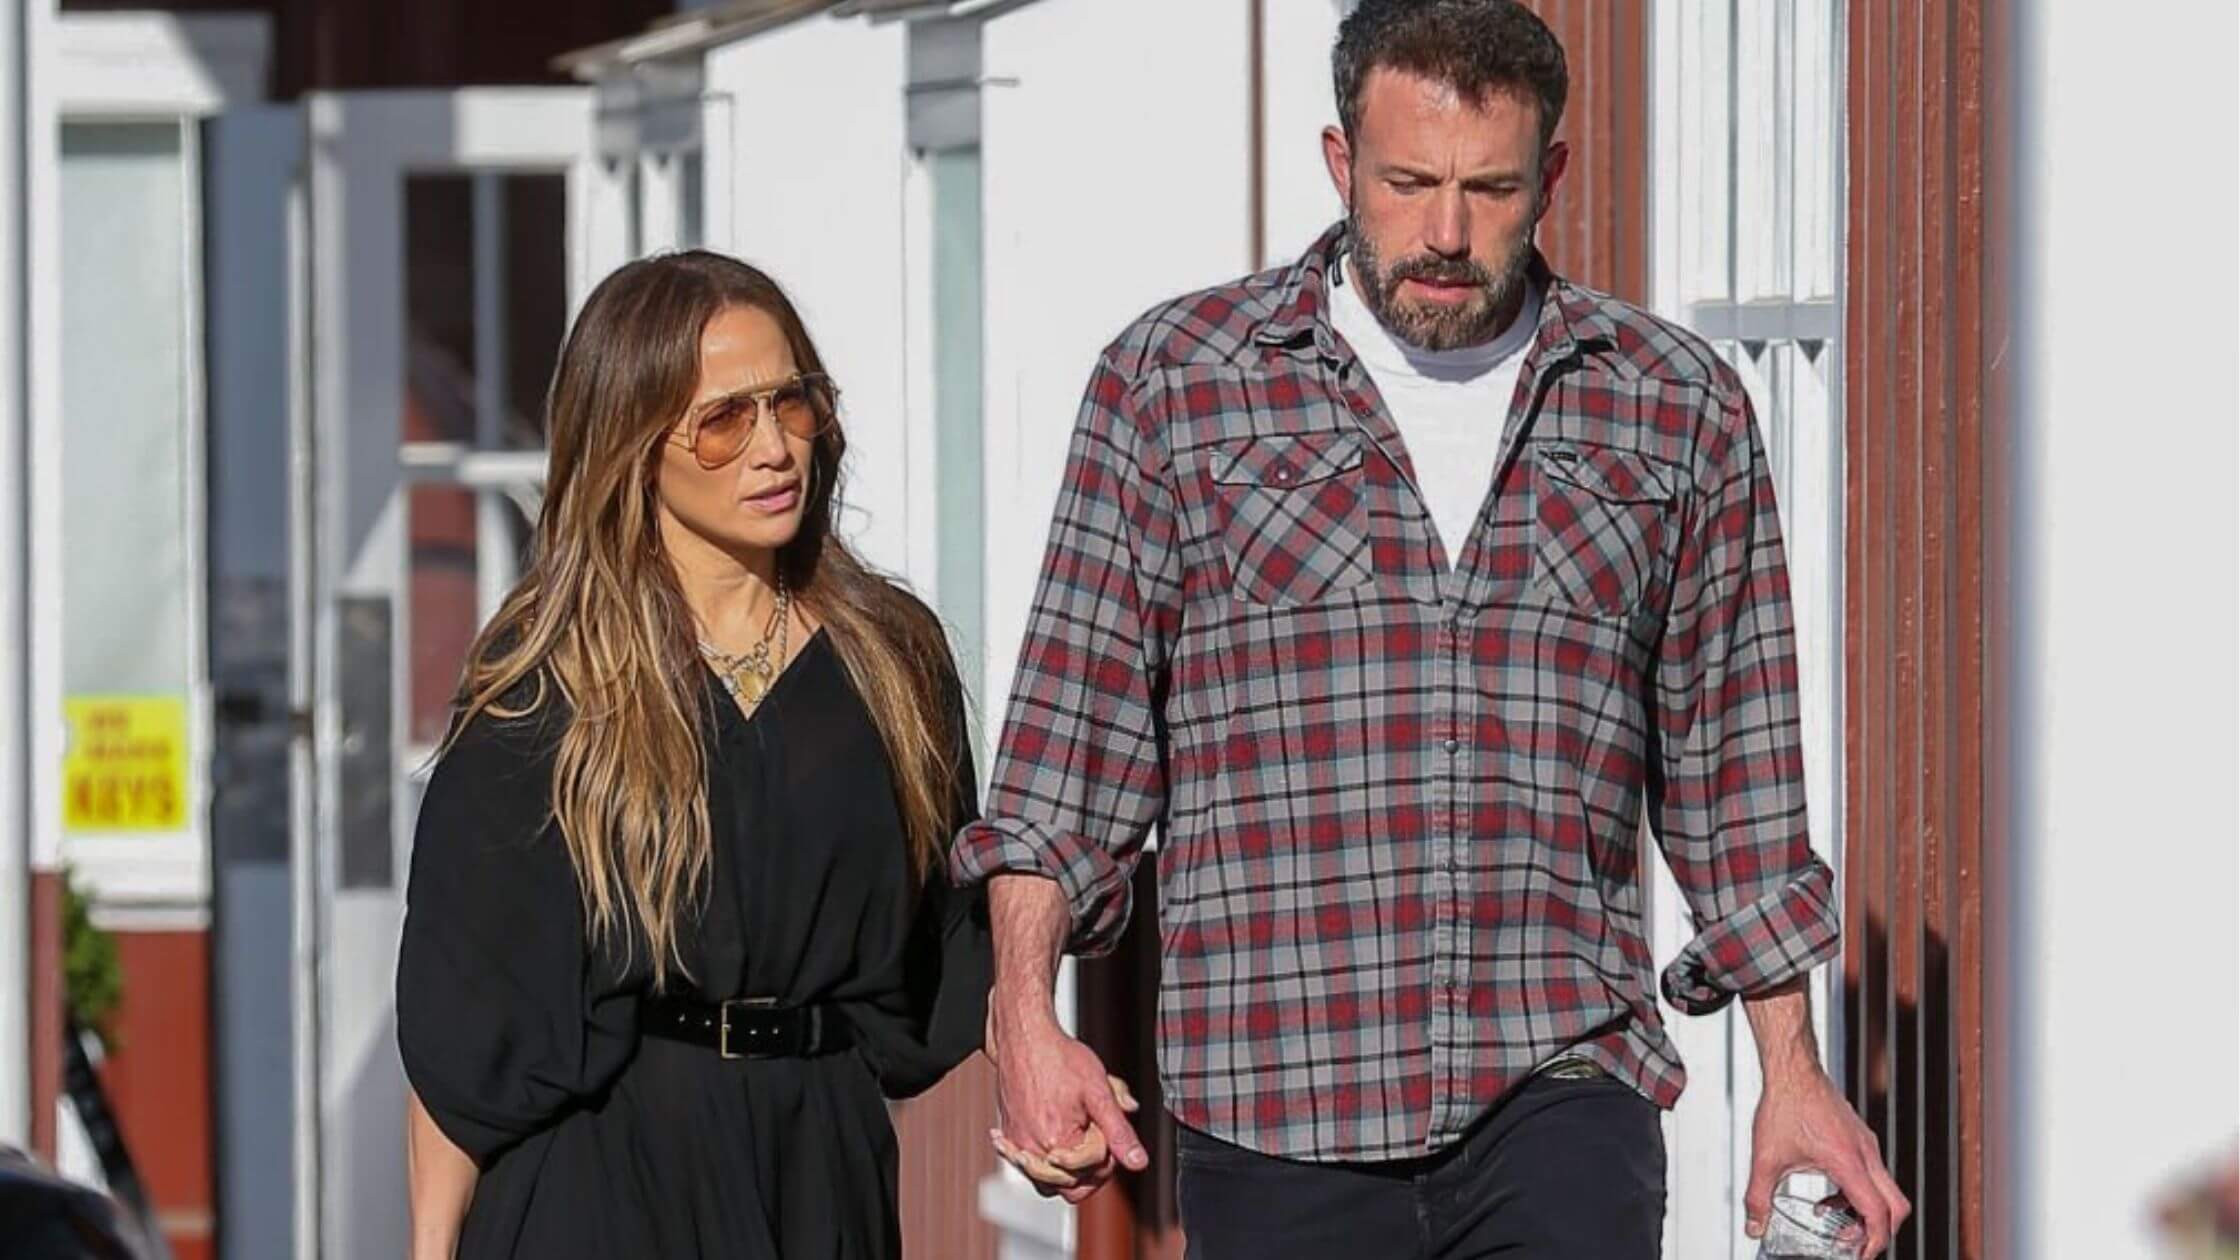 Jennifer Lopez & Ben Affleck Hold Hands & Match Their Looks, Spotted Out